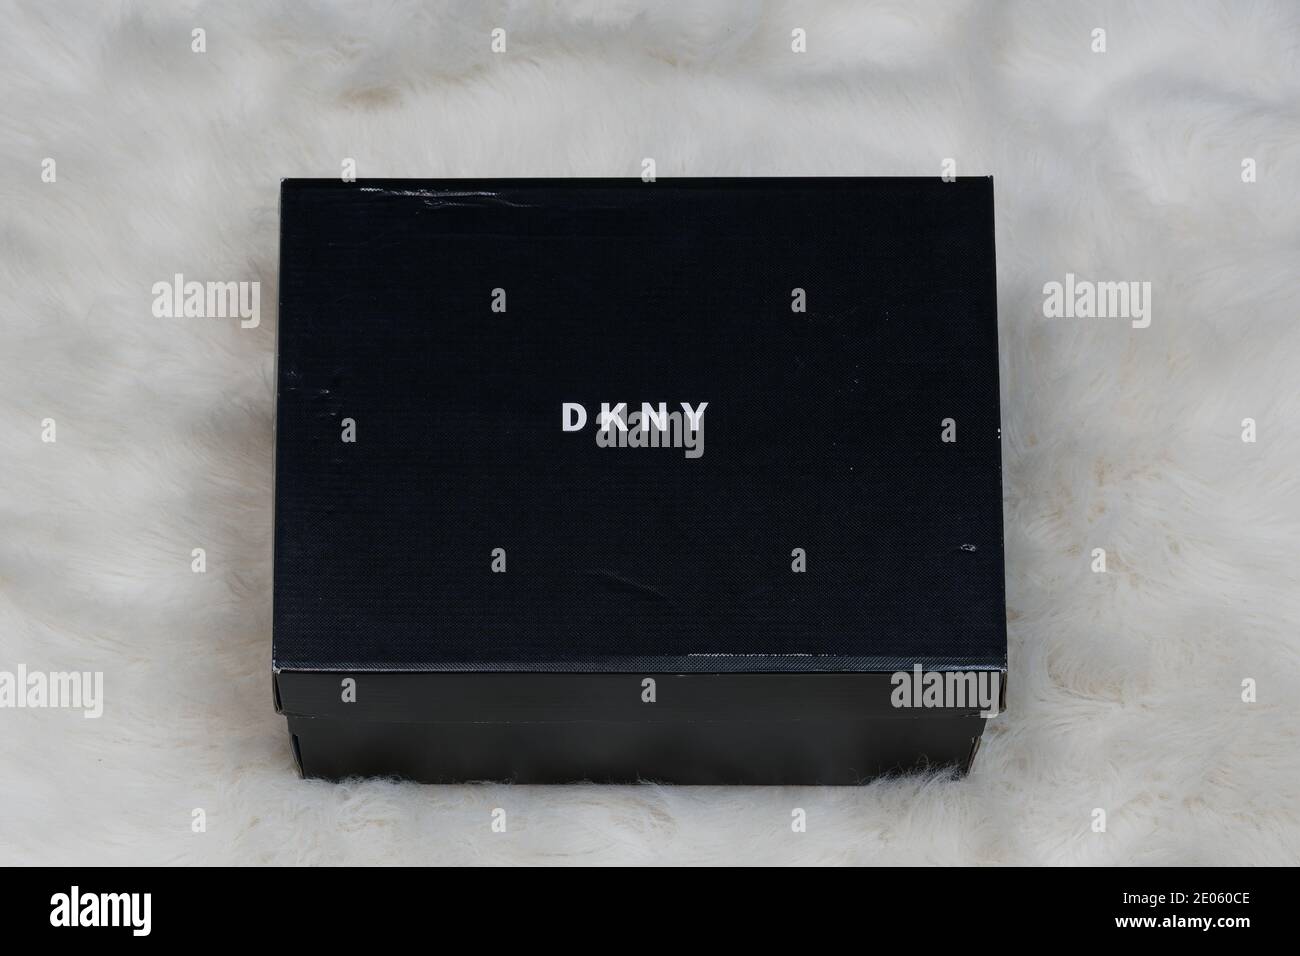 Thessaloniki, Greece - November 23 2020: Donna Karan online delivery box.  Display of order package containing a pair of DKNY fashion modern shoes  with Stock Photo - Alamy